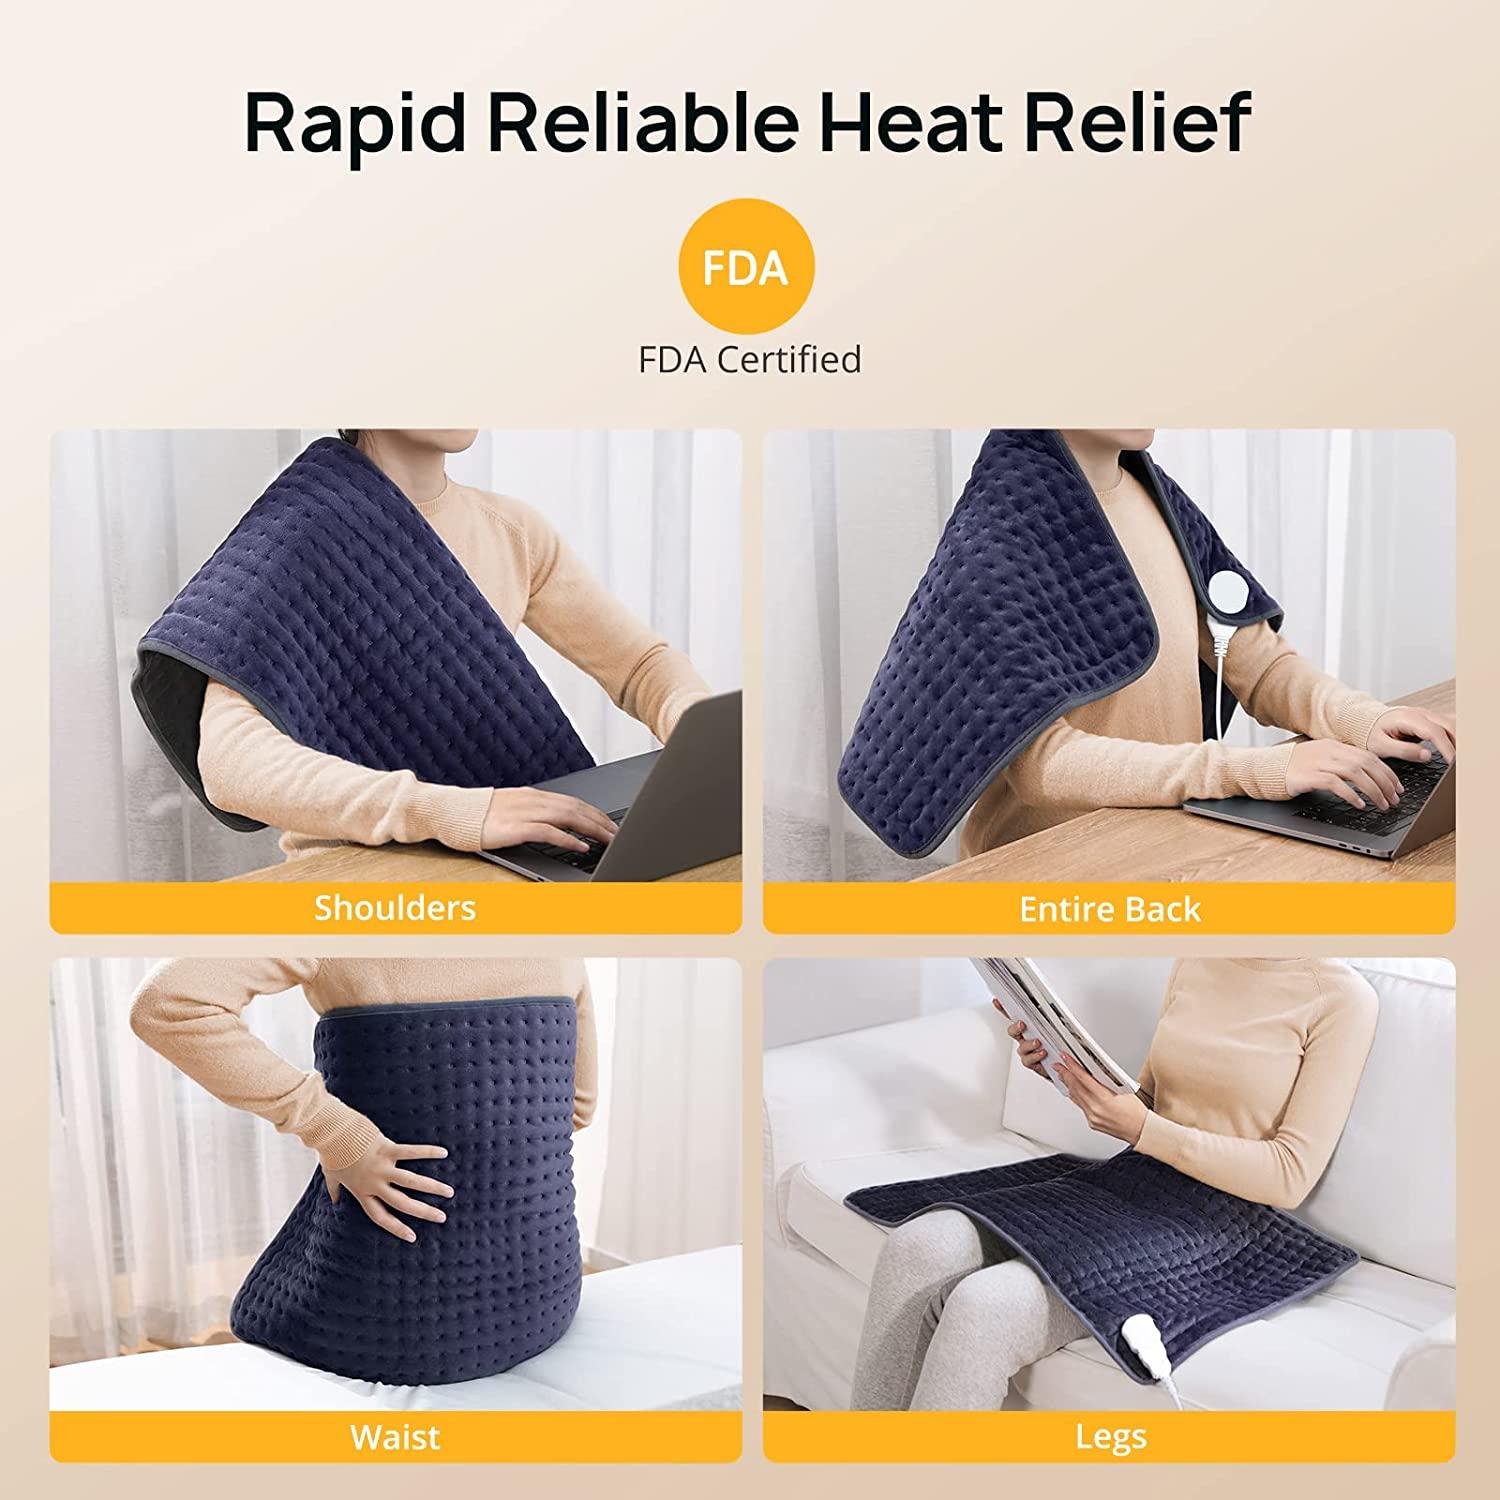 Evajoy Heating Pad 12*24 Extra-Large Electric Massager Heating Pad